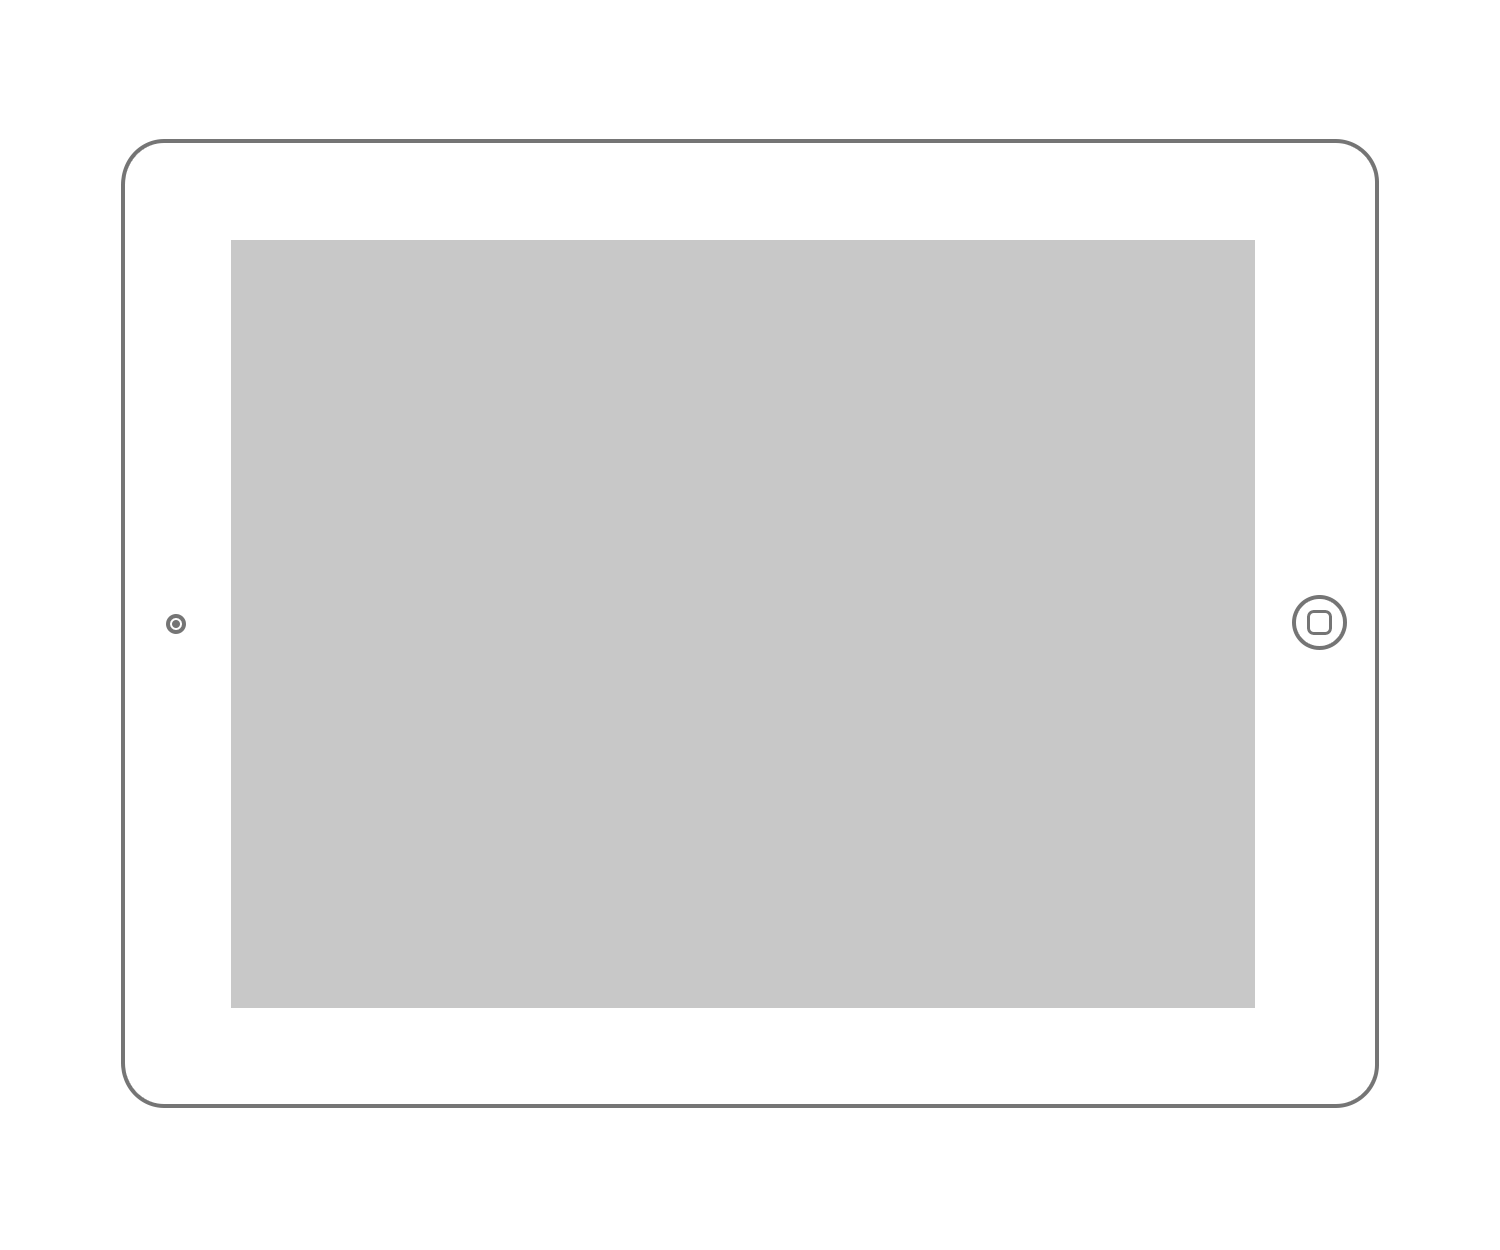 Download Ipad In PNG Transparent Background, Free Download #23944 - FreeIconsPNG